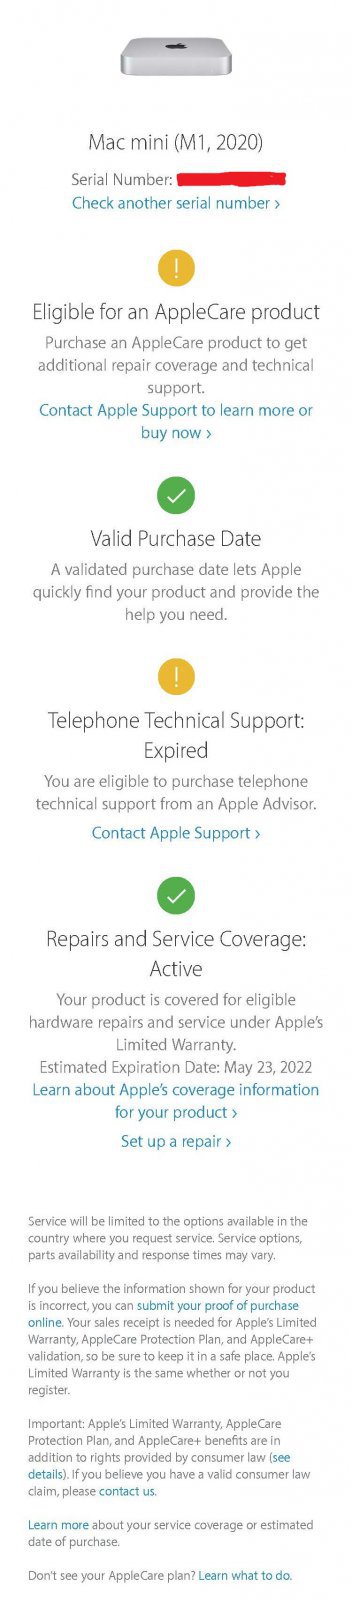 Service and Support Coverage - Apple Support (1).jpg